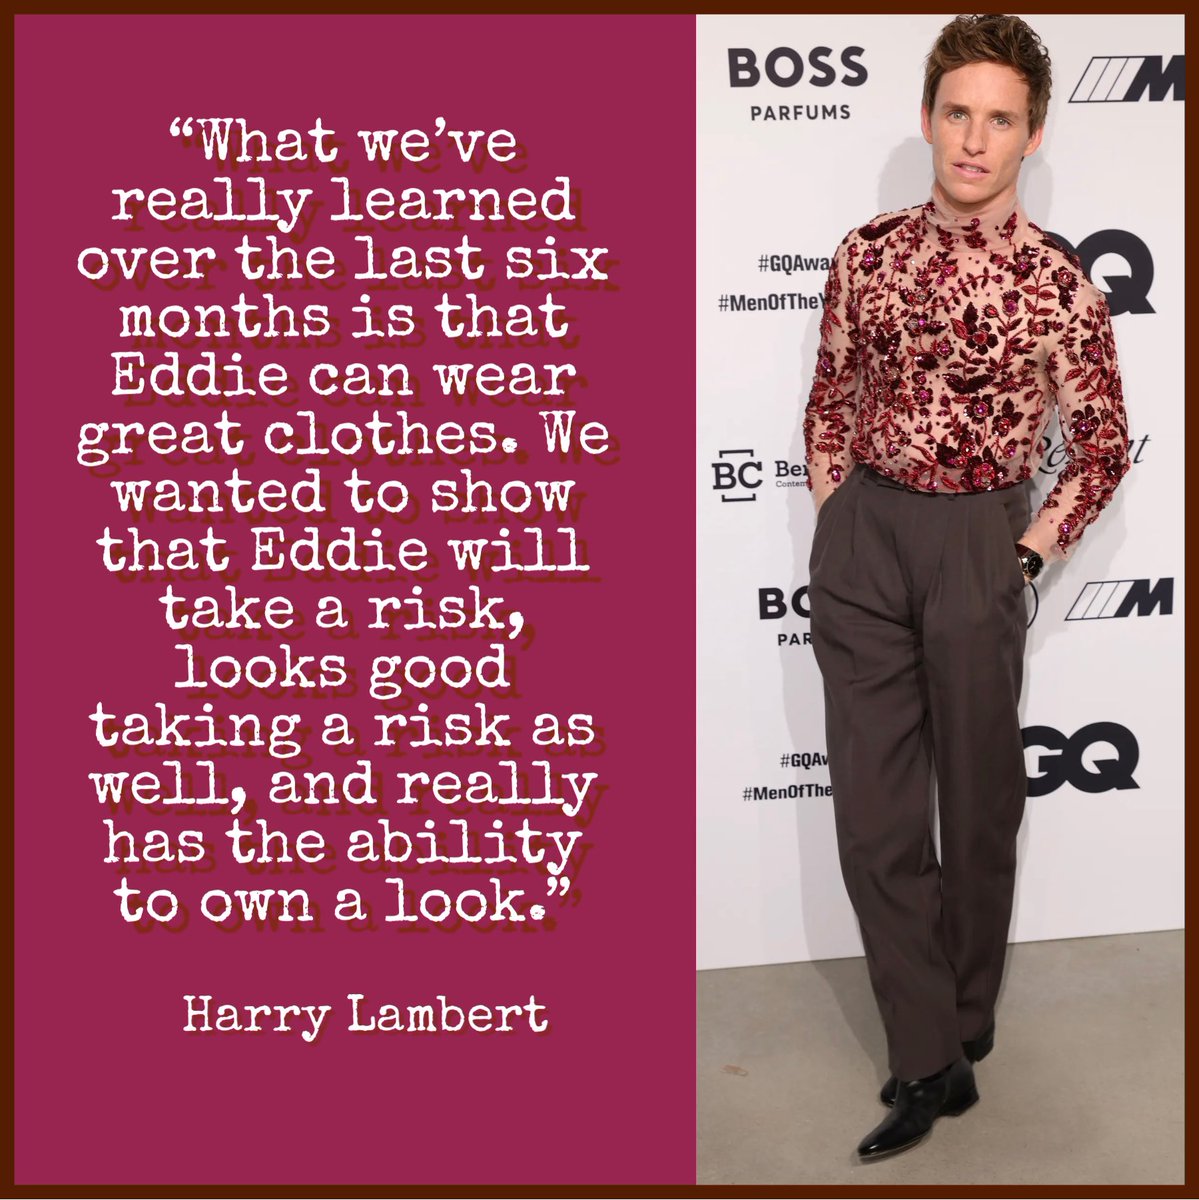 .@voguemagazine anoints #eddieredmayne “This Awards Season’s Breakout Style Star,” + his stylist #HarryLambert explains how they did it. Excerpts here (with Vogue/Getty photos) + article here: vogue.com/slideshow/eddi…